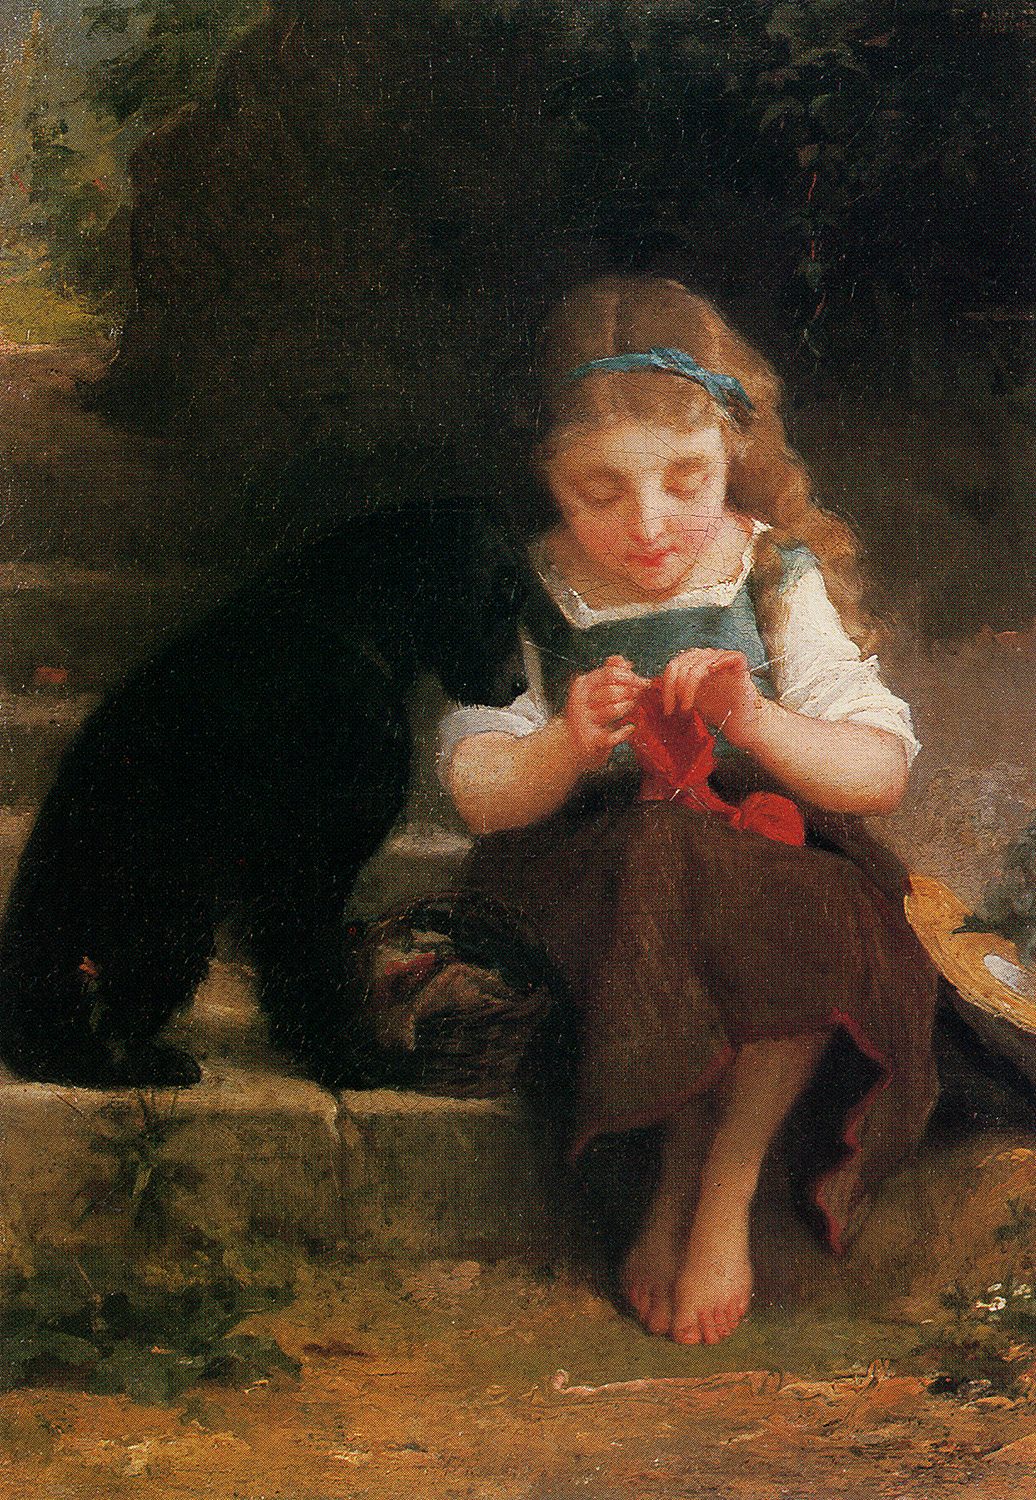 A young girl knitting with a dog sitting next to her - Best of Friends - Emile Munier